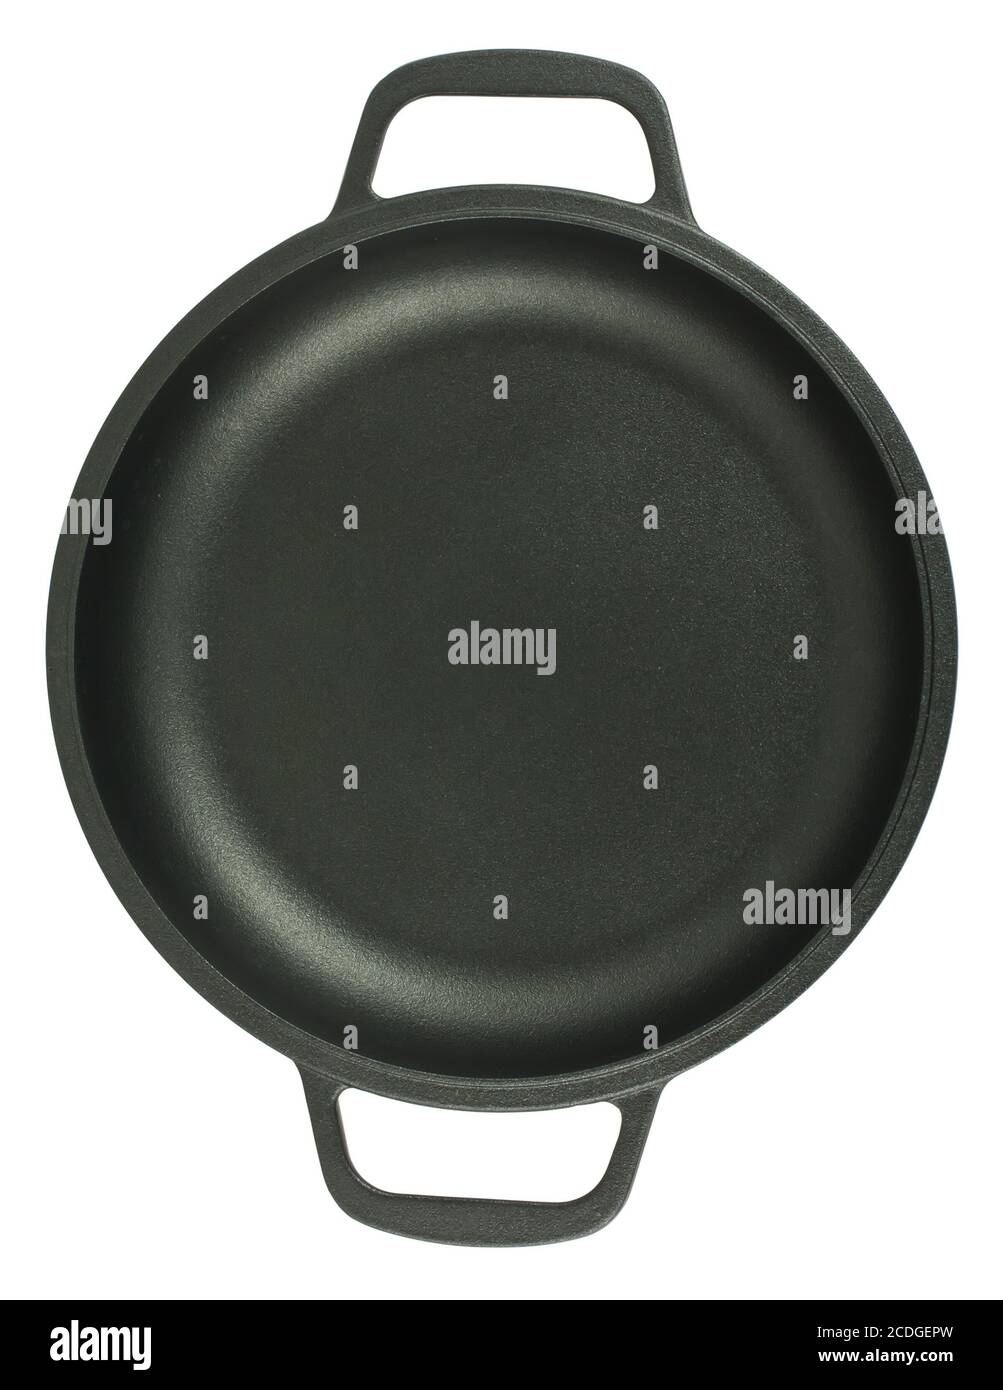 Pan with two handles Stock Photo